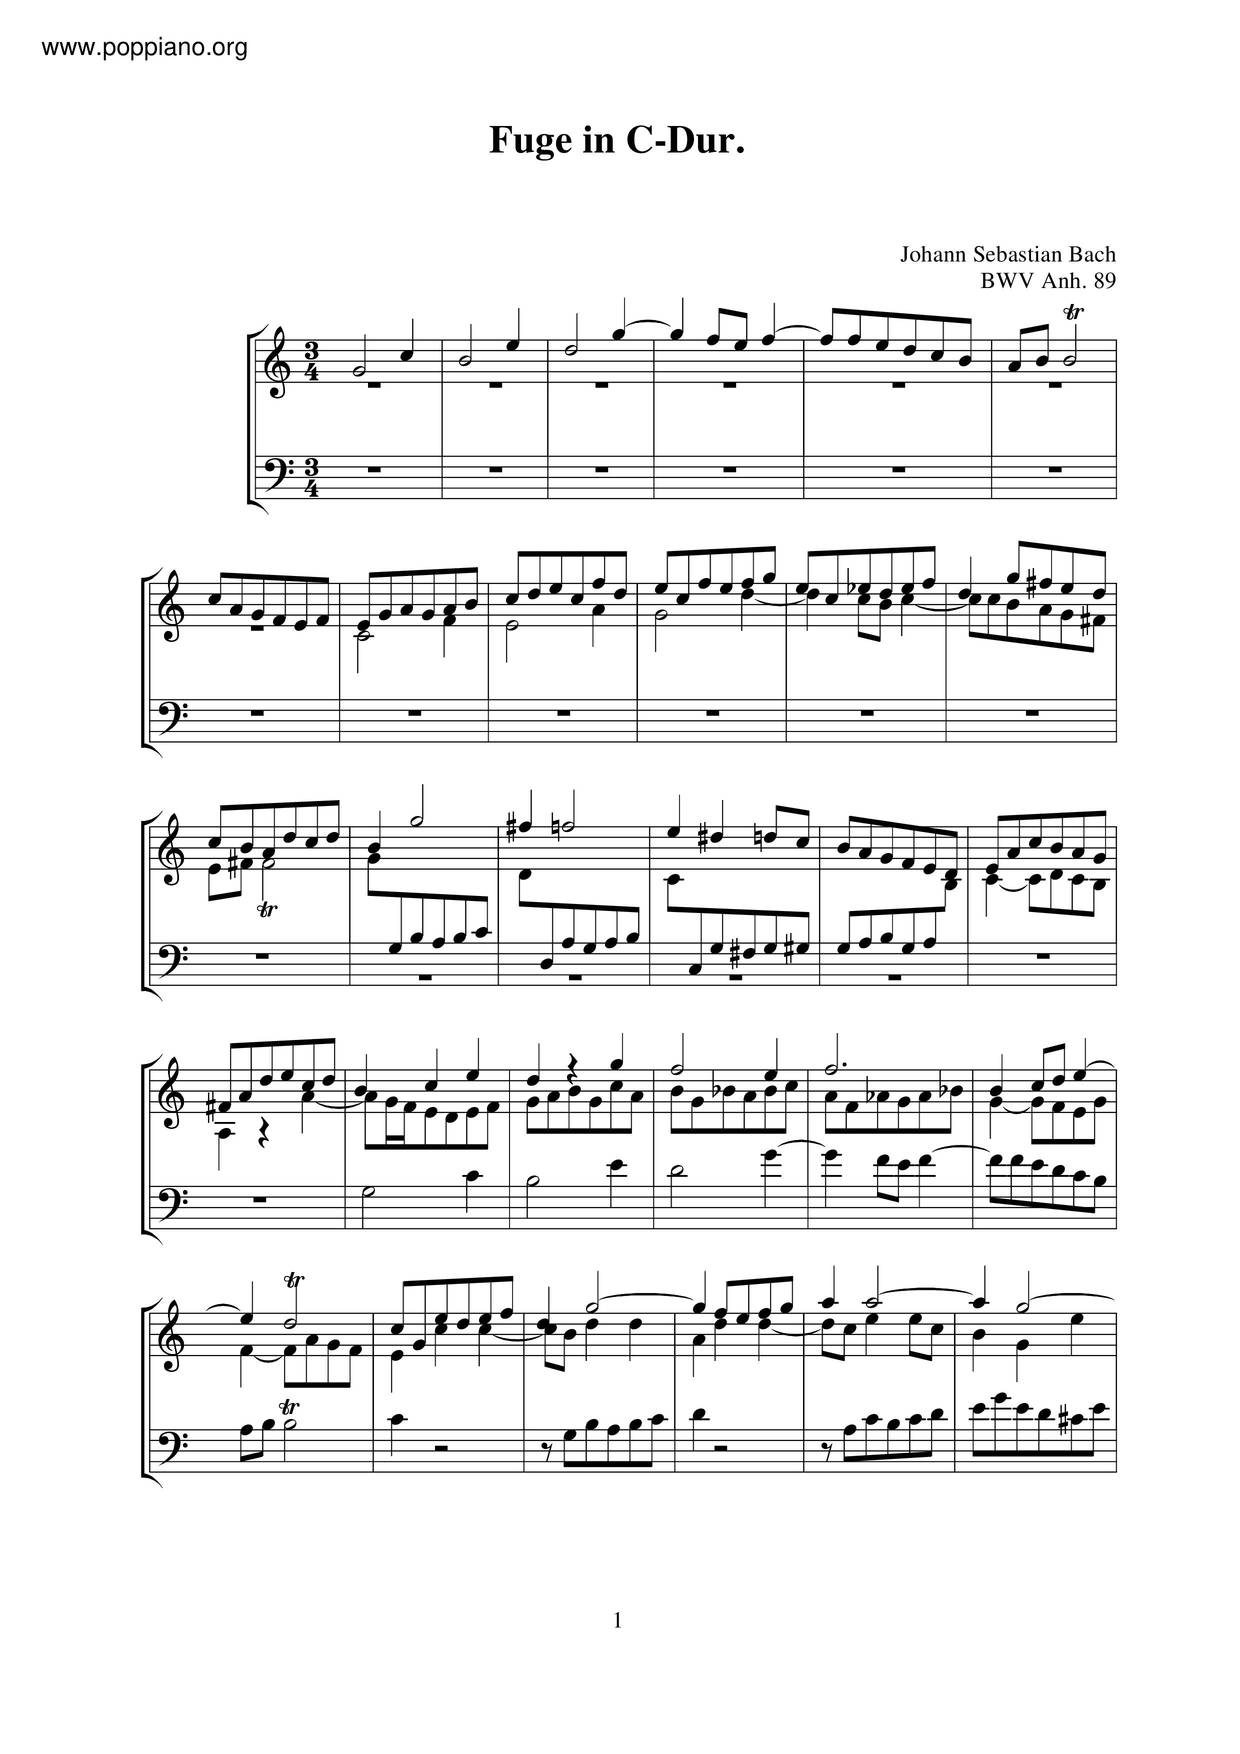 Fugue In C Major, BWV Anh. 89 Score